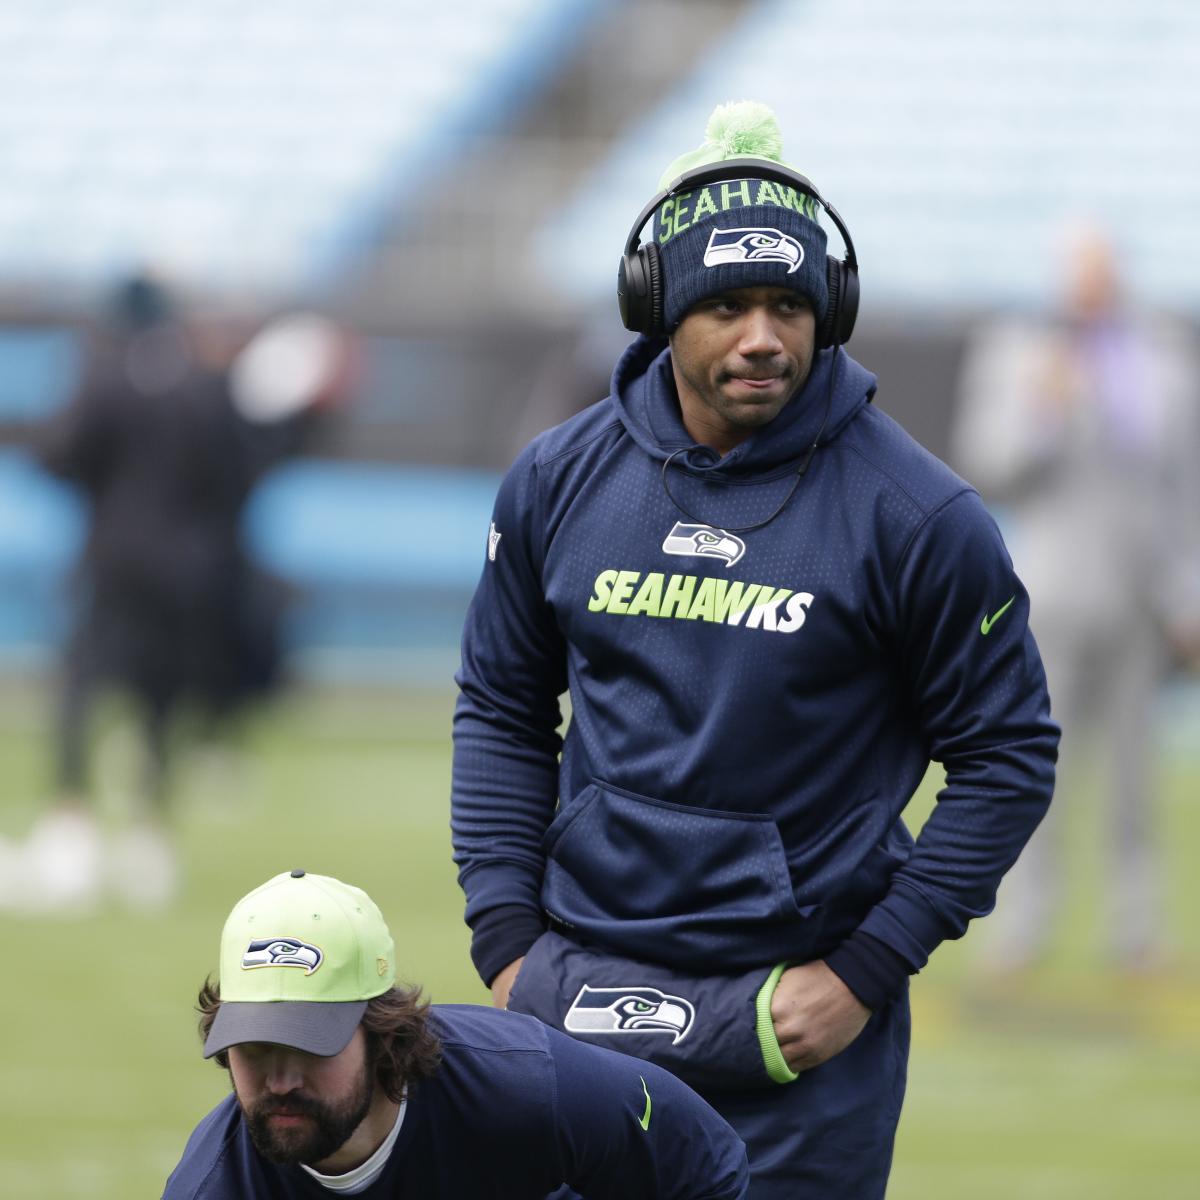 Is a Seahawks sale coming? Not so fast, explains Brock Huard